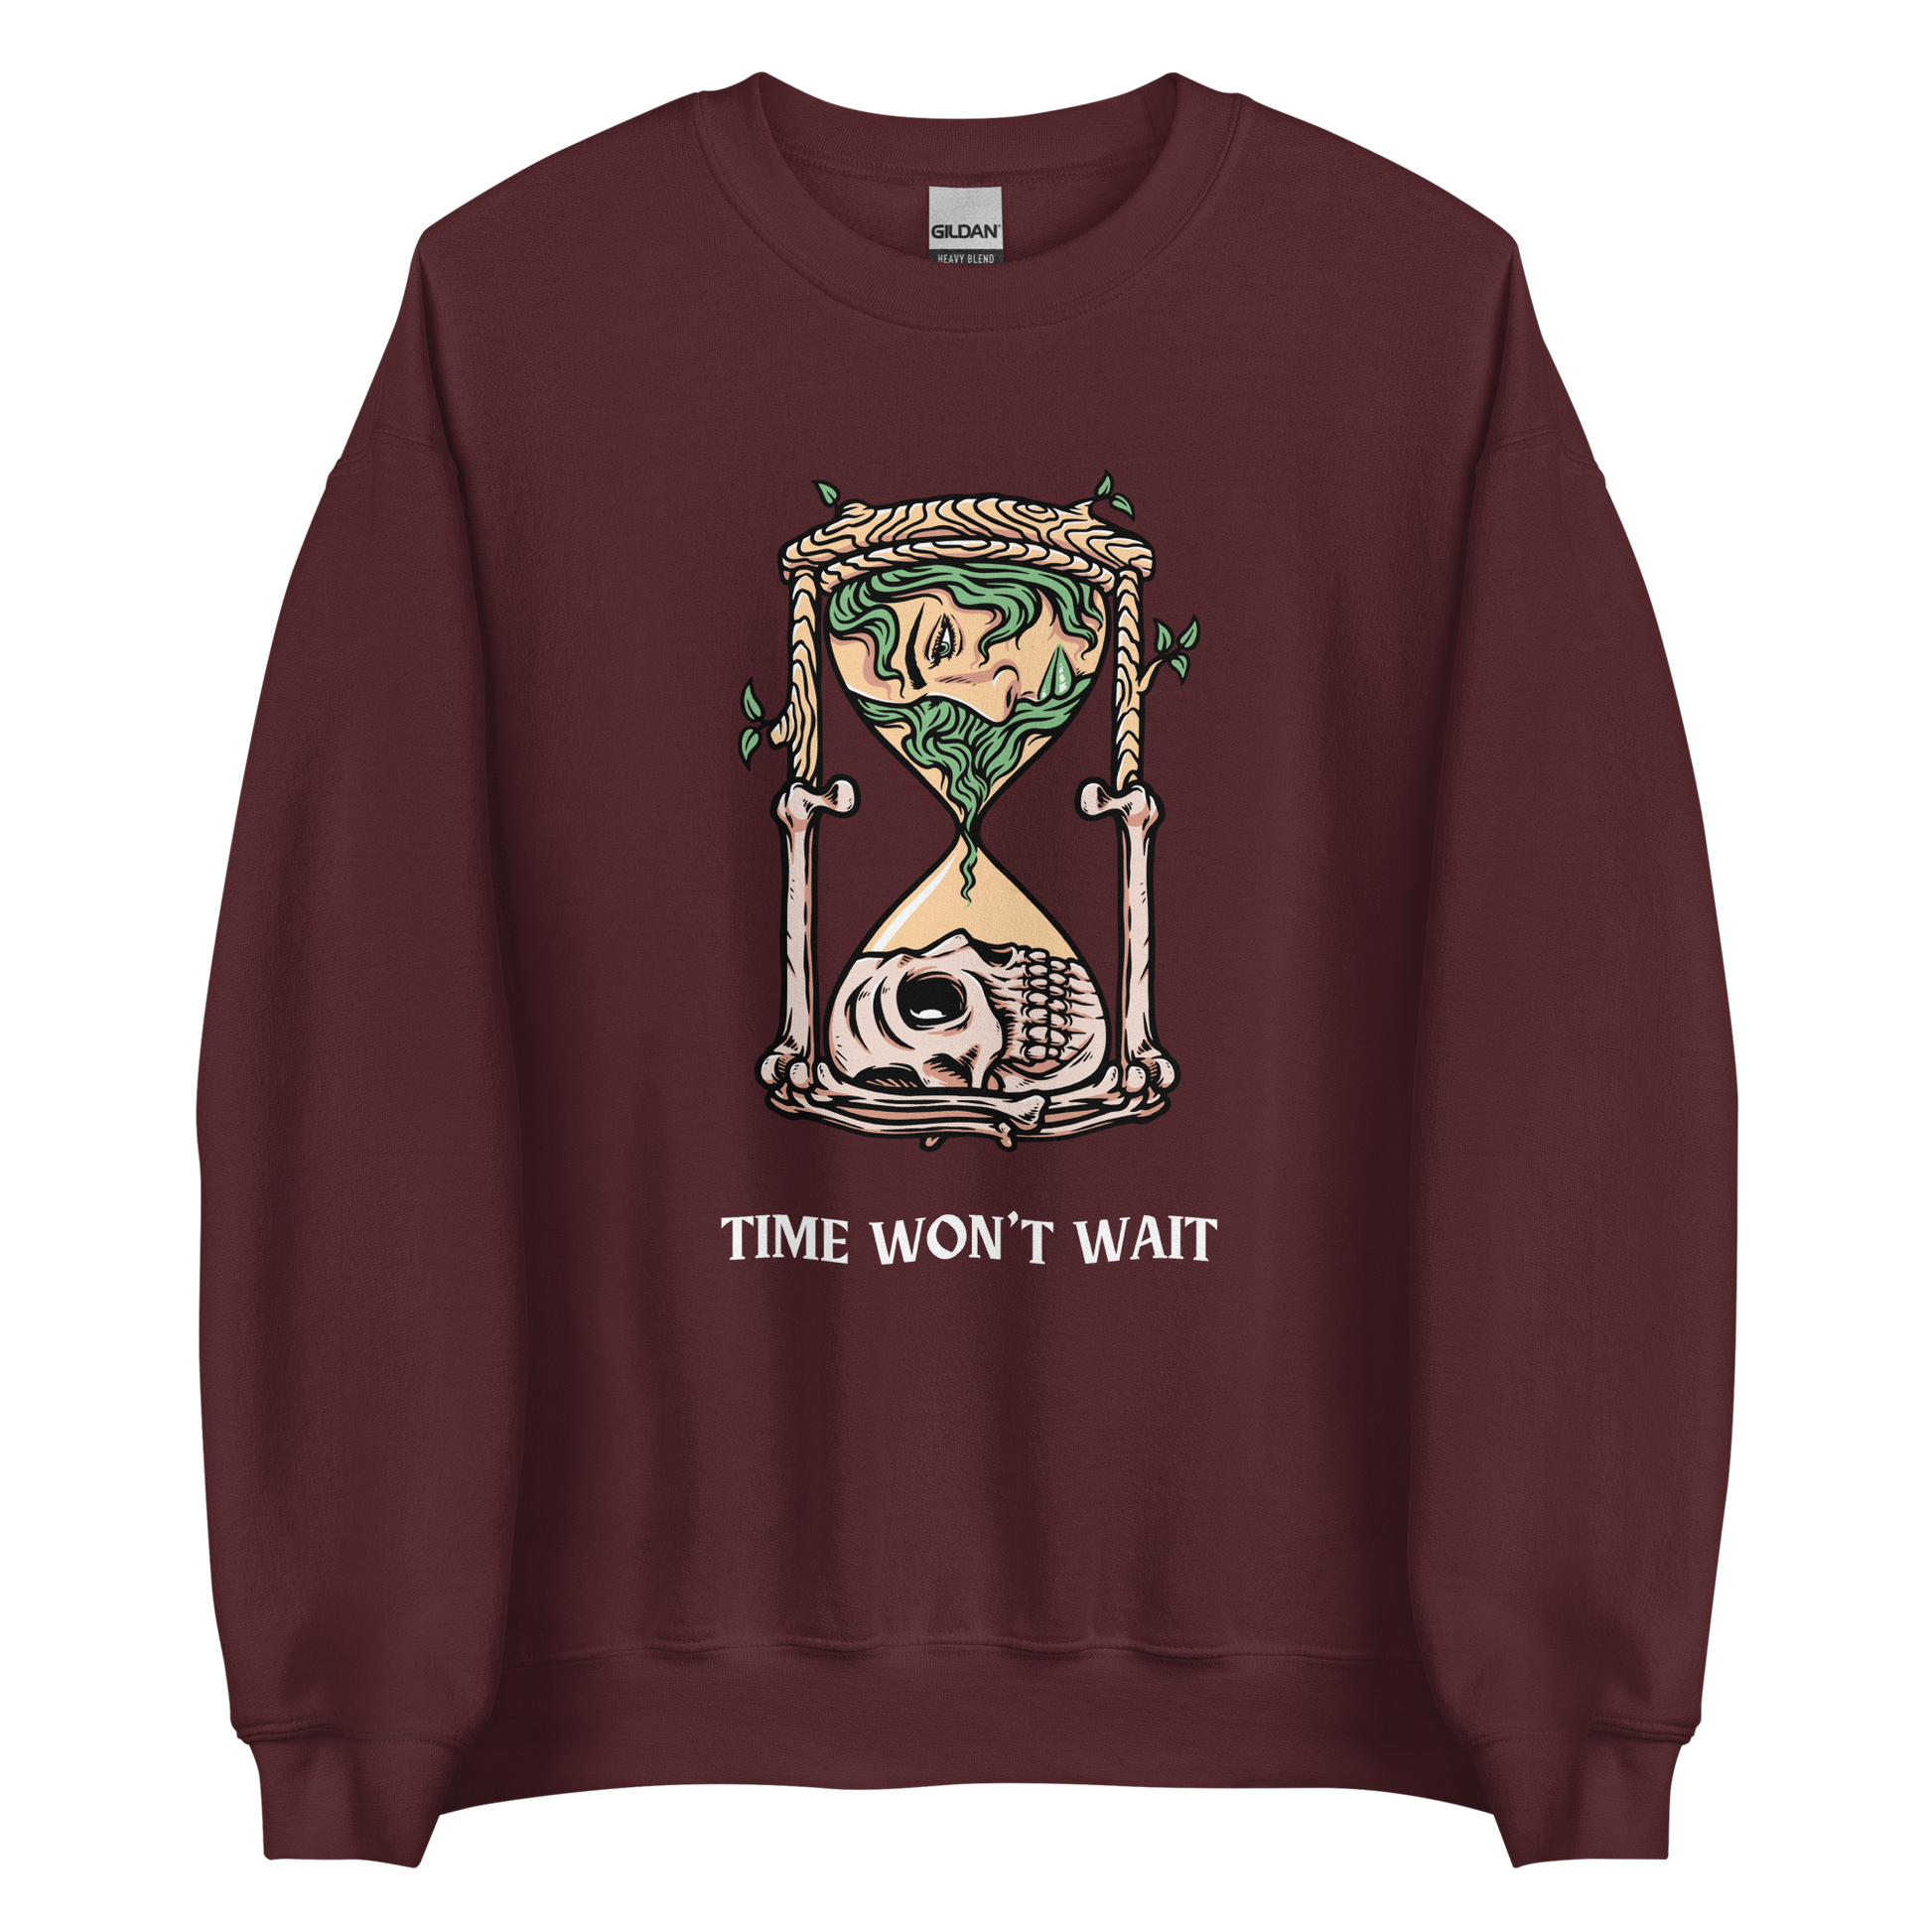 Maroon Hourglass Sweatshirt featuring a captivating Time Won't Wait graphic on the chest - Cool Graphic Hourglass Sweatshirts - Boozy Fox